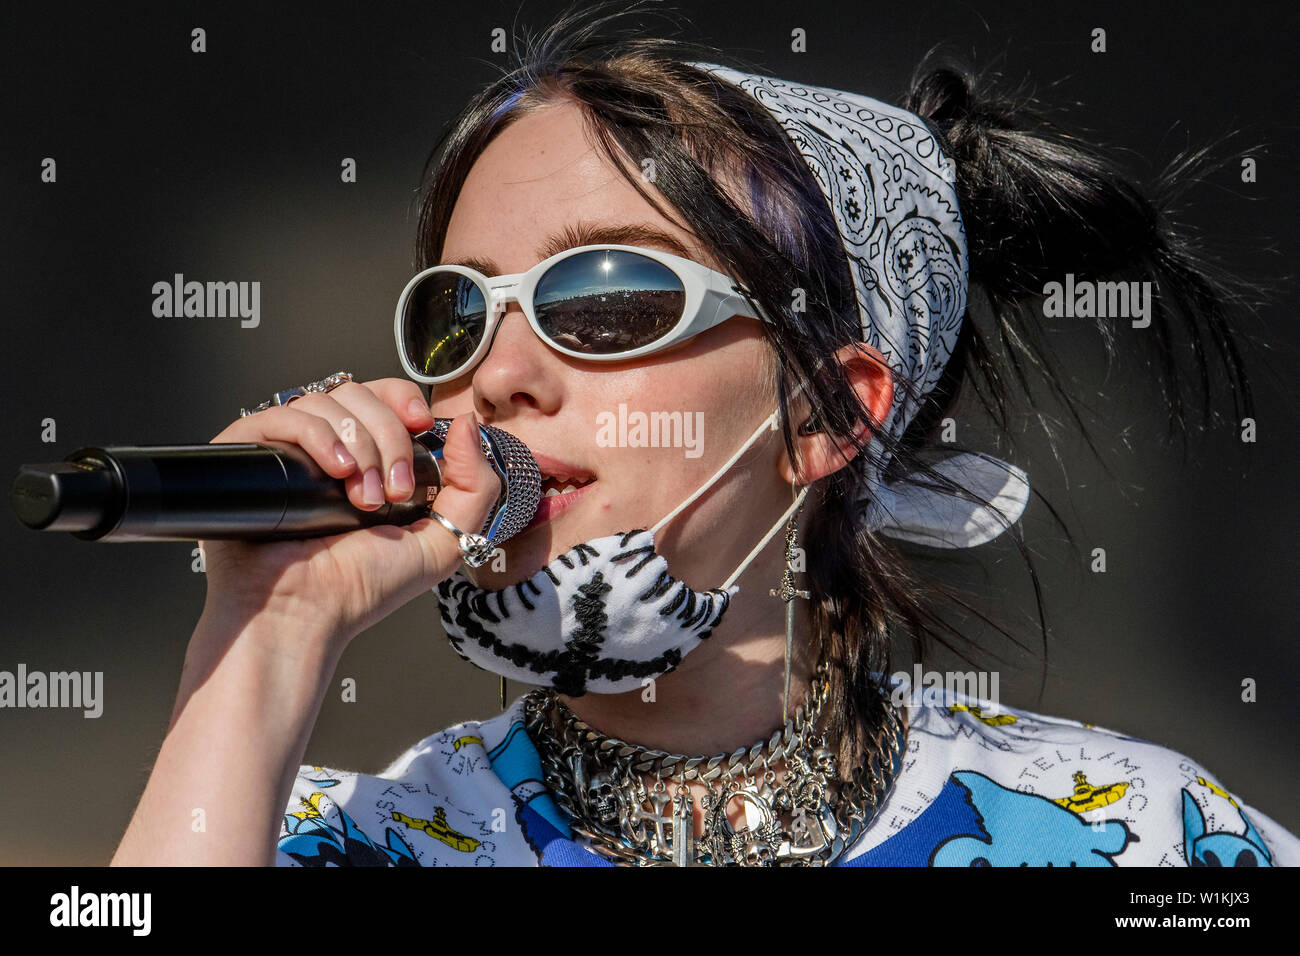 Billie Eilish's blue hair and outfit at the 2019 Glastonbury Festival - wide 10